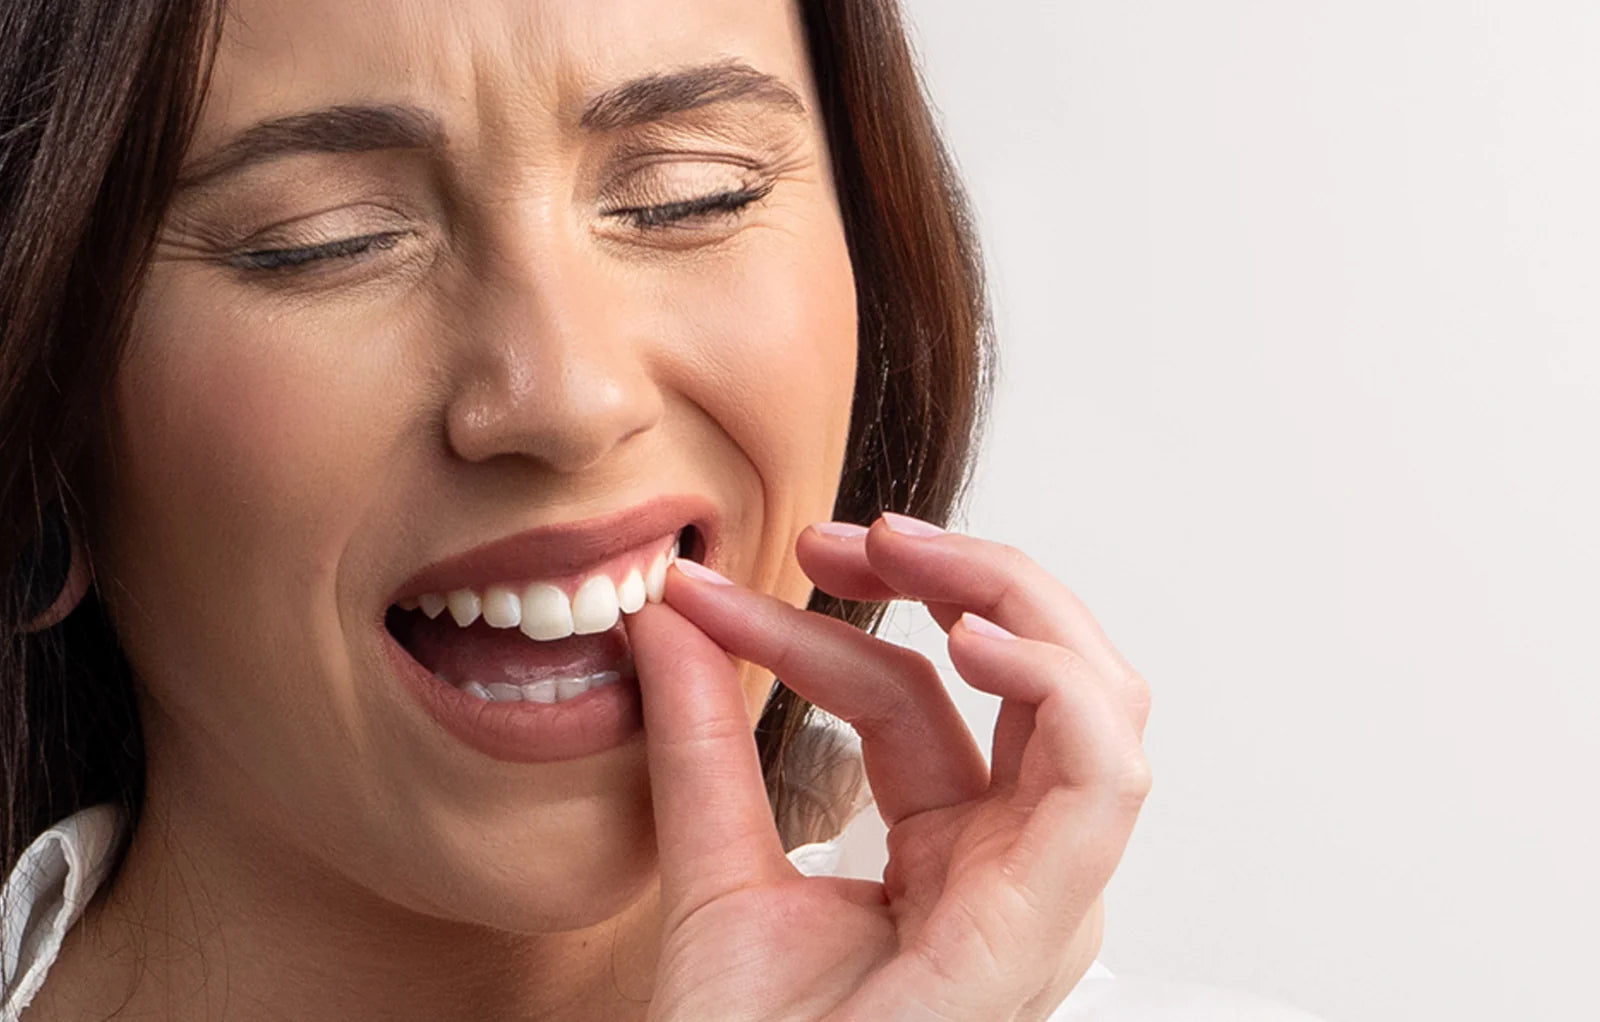 How to Prevent Bleeding Gums When Brushing Your Teeth